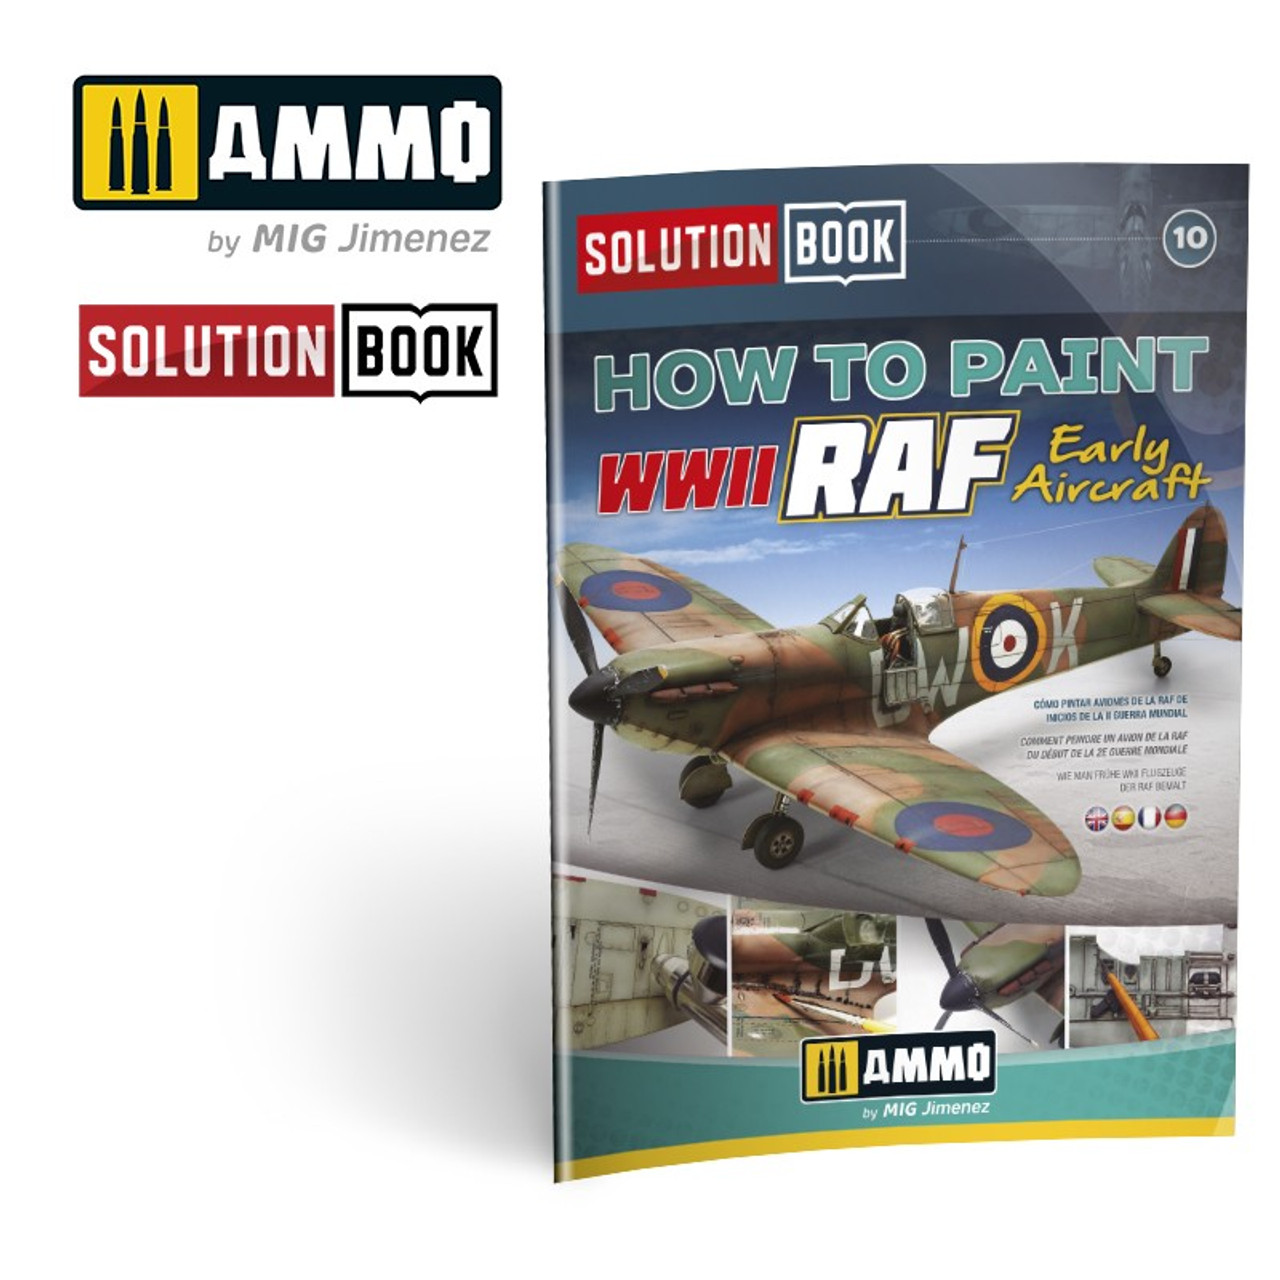 Solution Book 10: WWII RAF EARLY AIRCRAFT